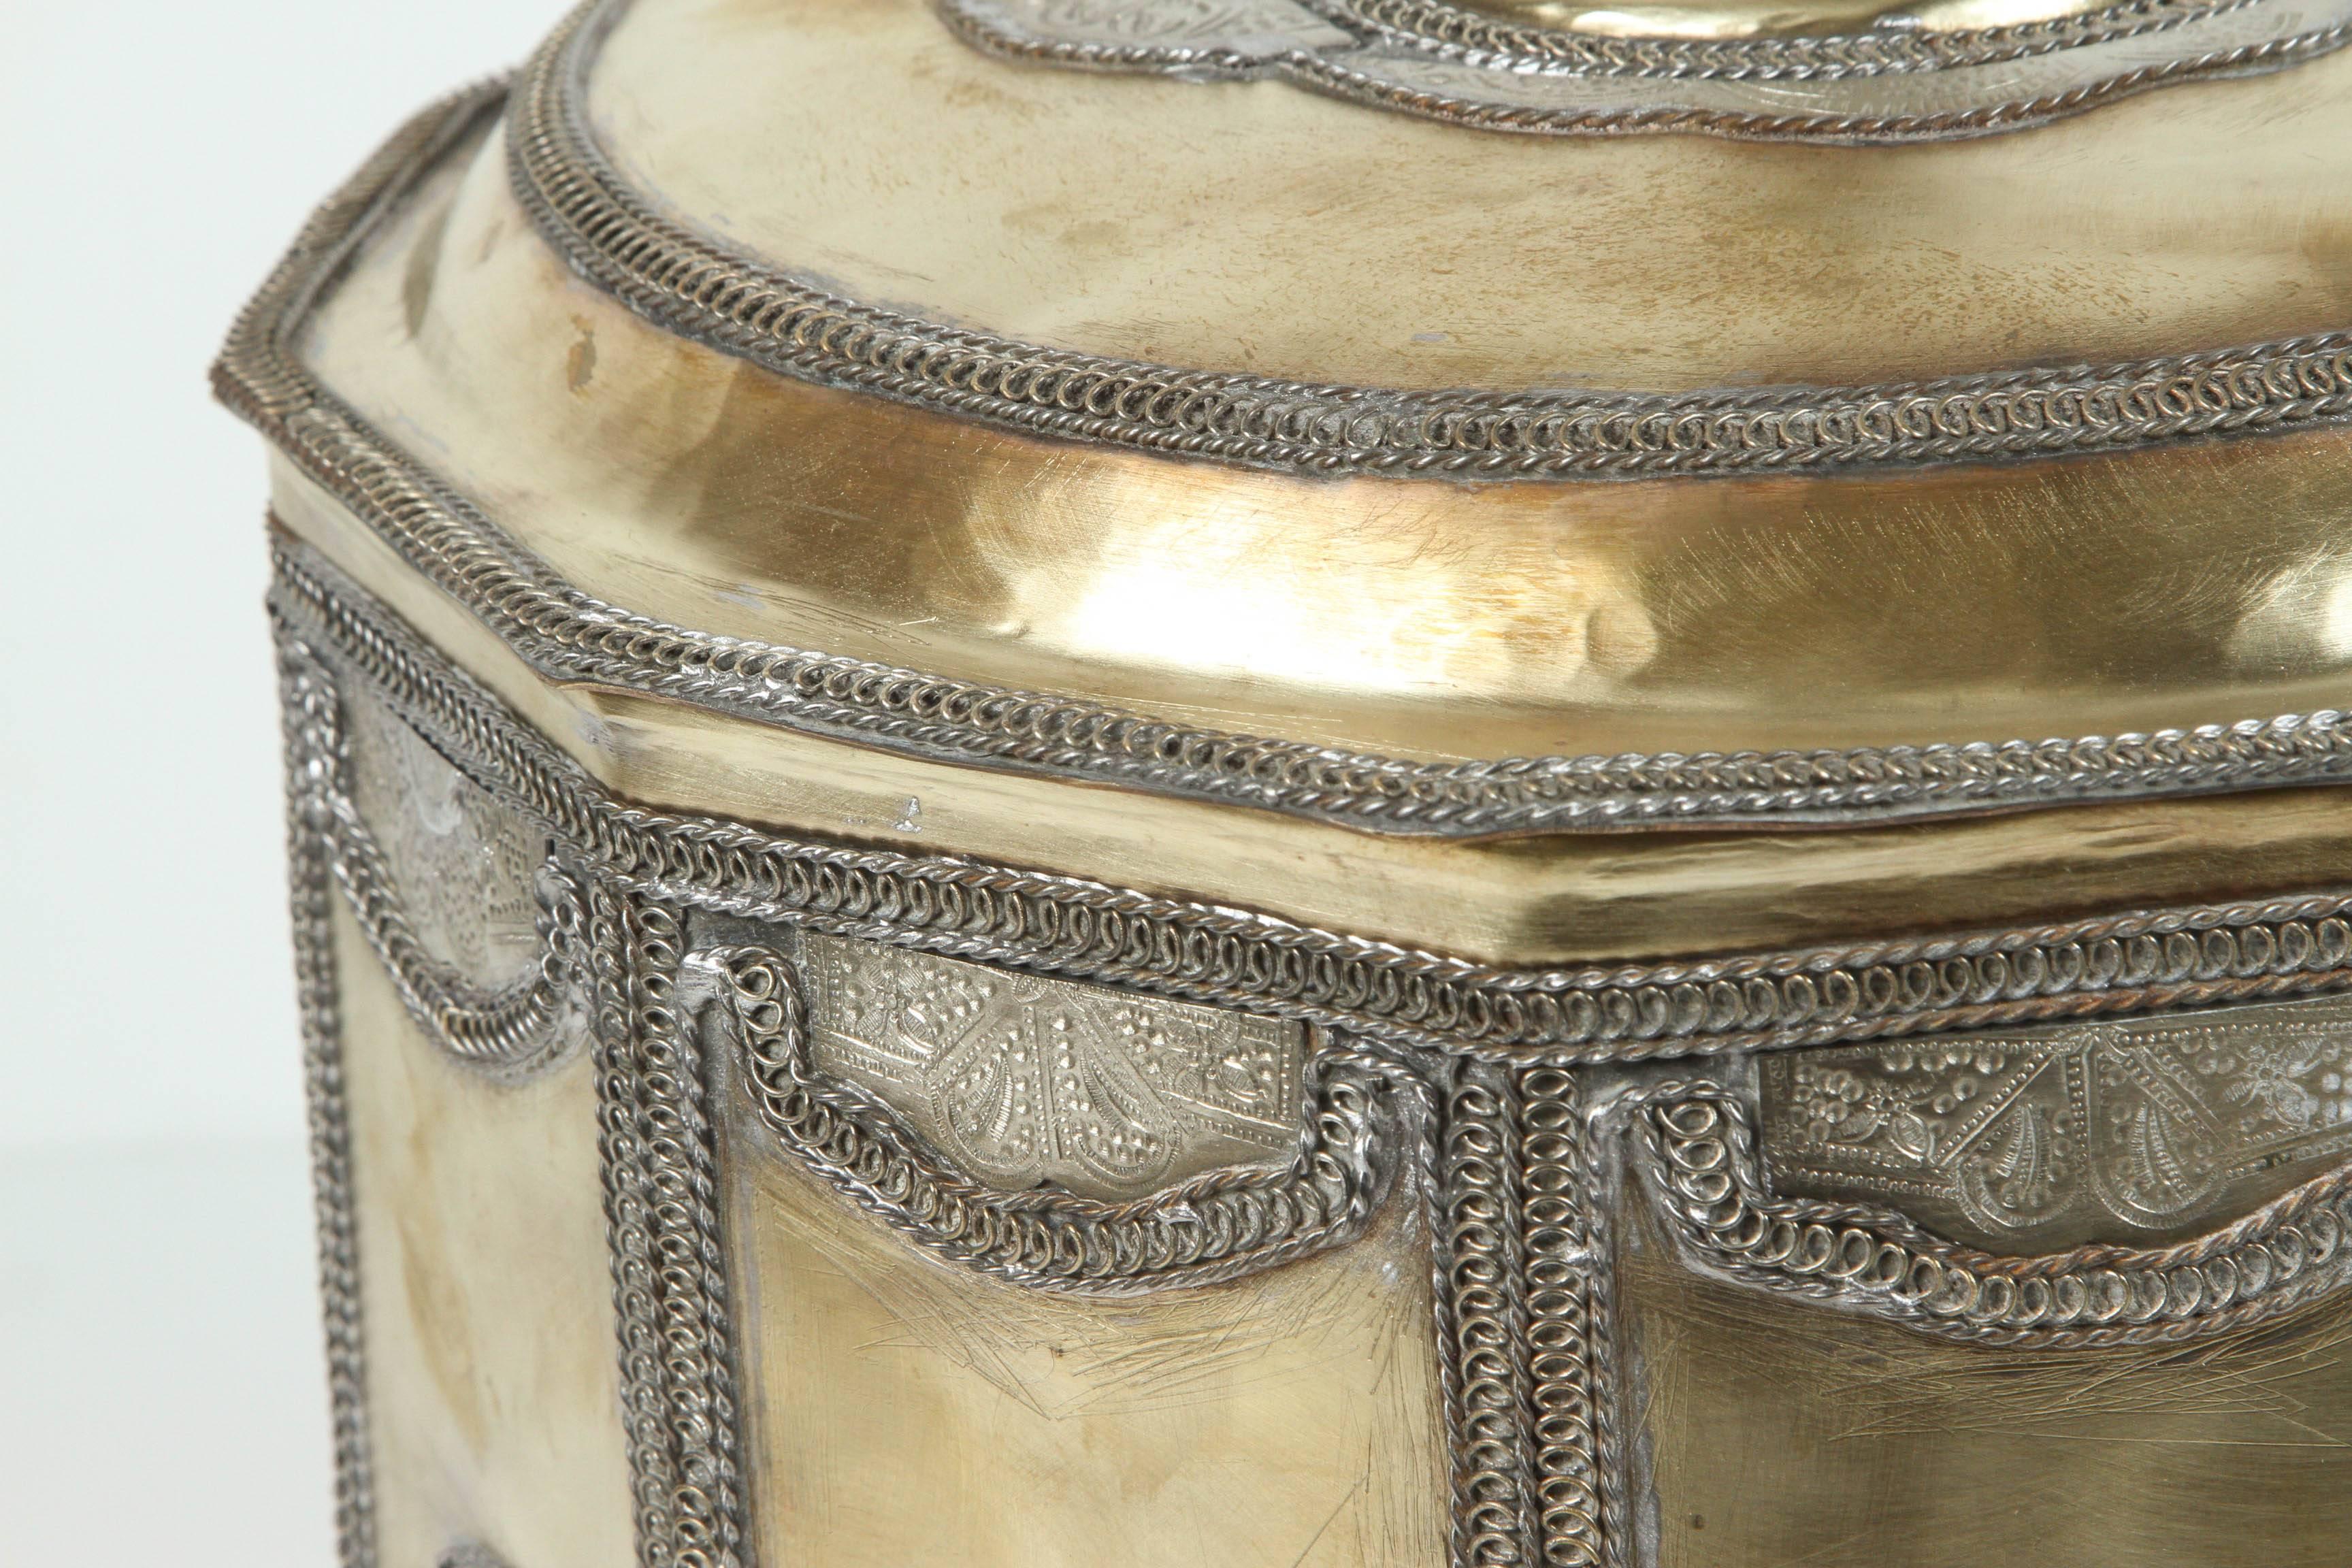 Hand-Crafted Large Brass Moroccan Cookie Jar with Silver Filigree Designs